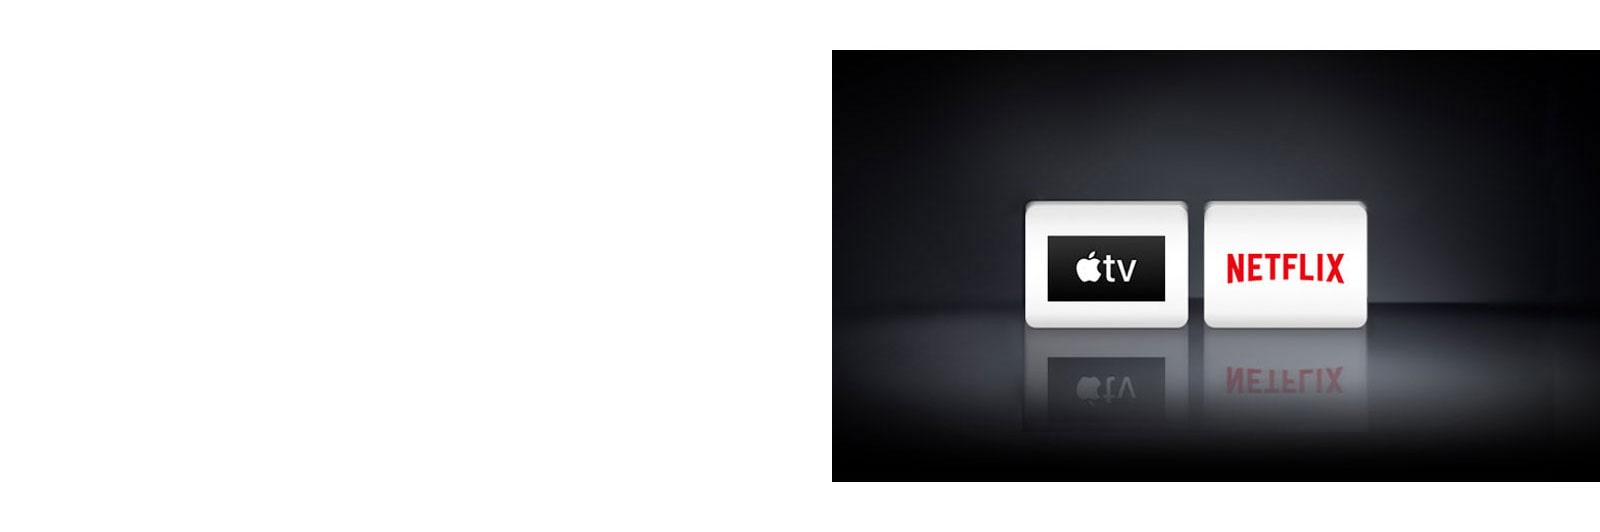 Two app logos shown from left to right: Apple TV and Netflix.